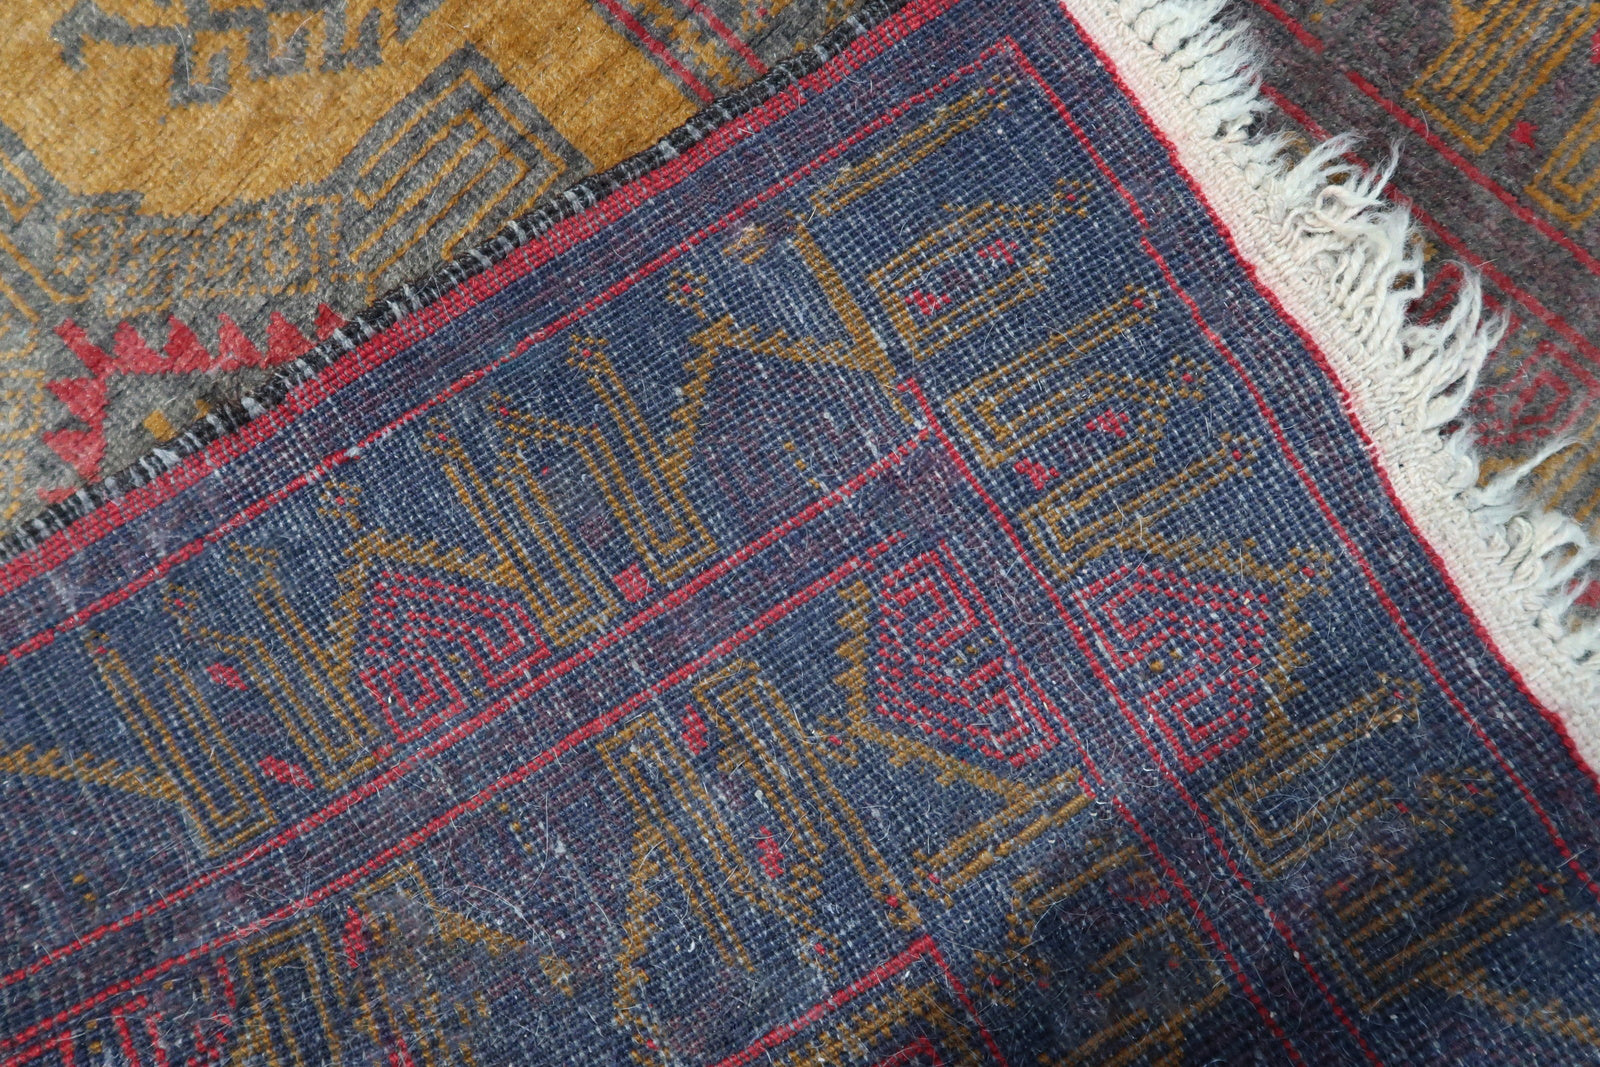 Back side of the handmade vintage Afghan Baluch rug revealing the woven structure and natural wool material